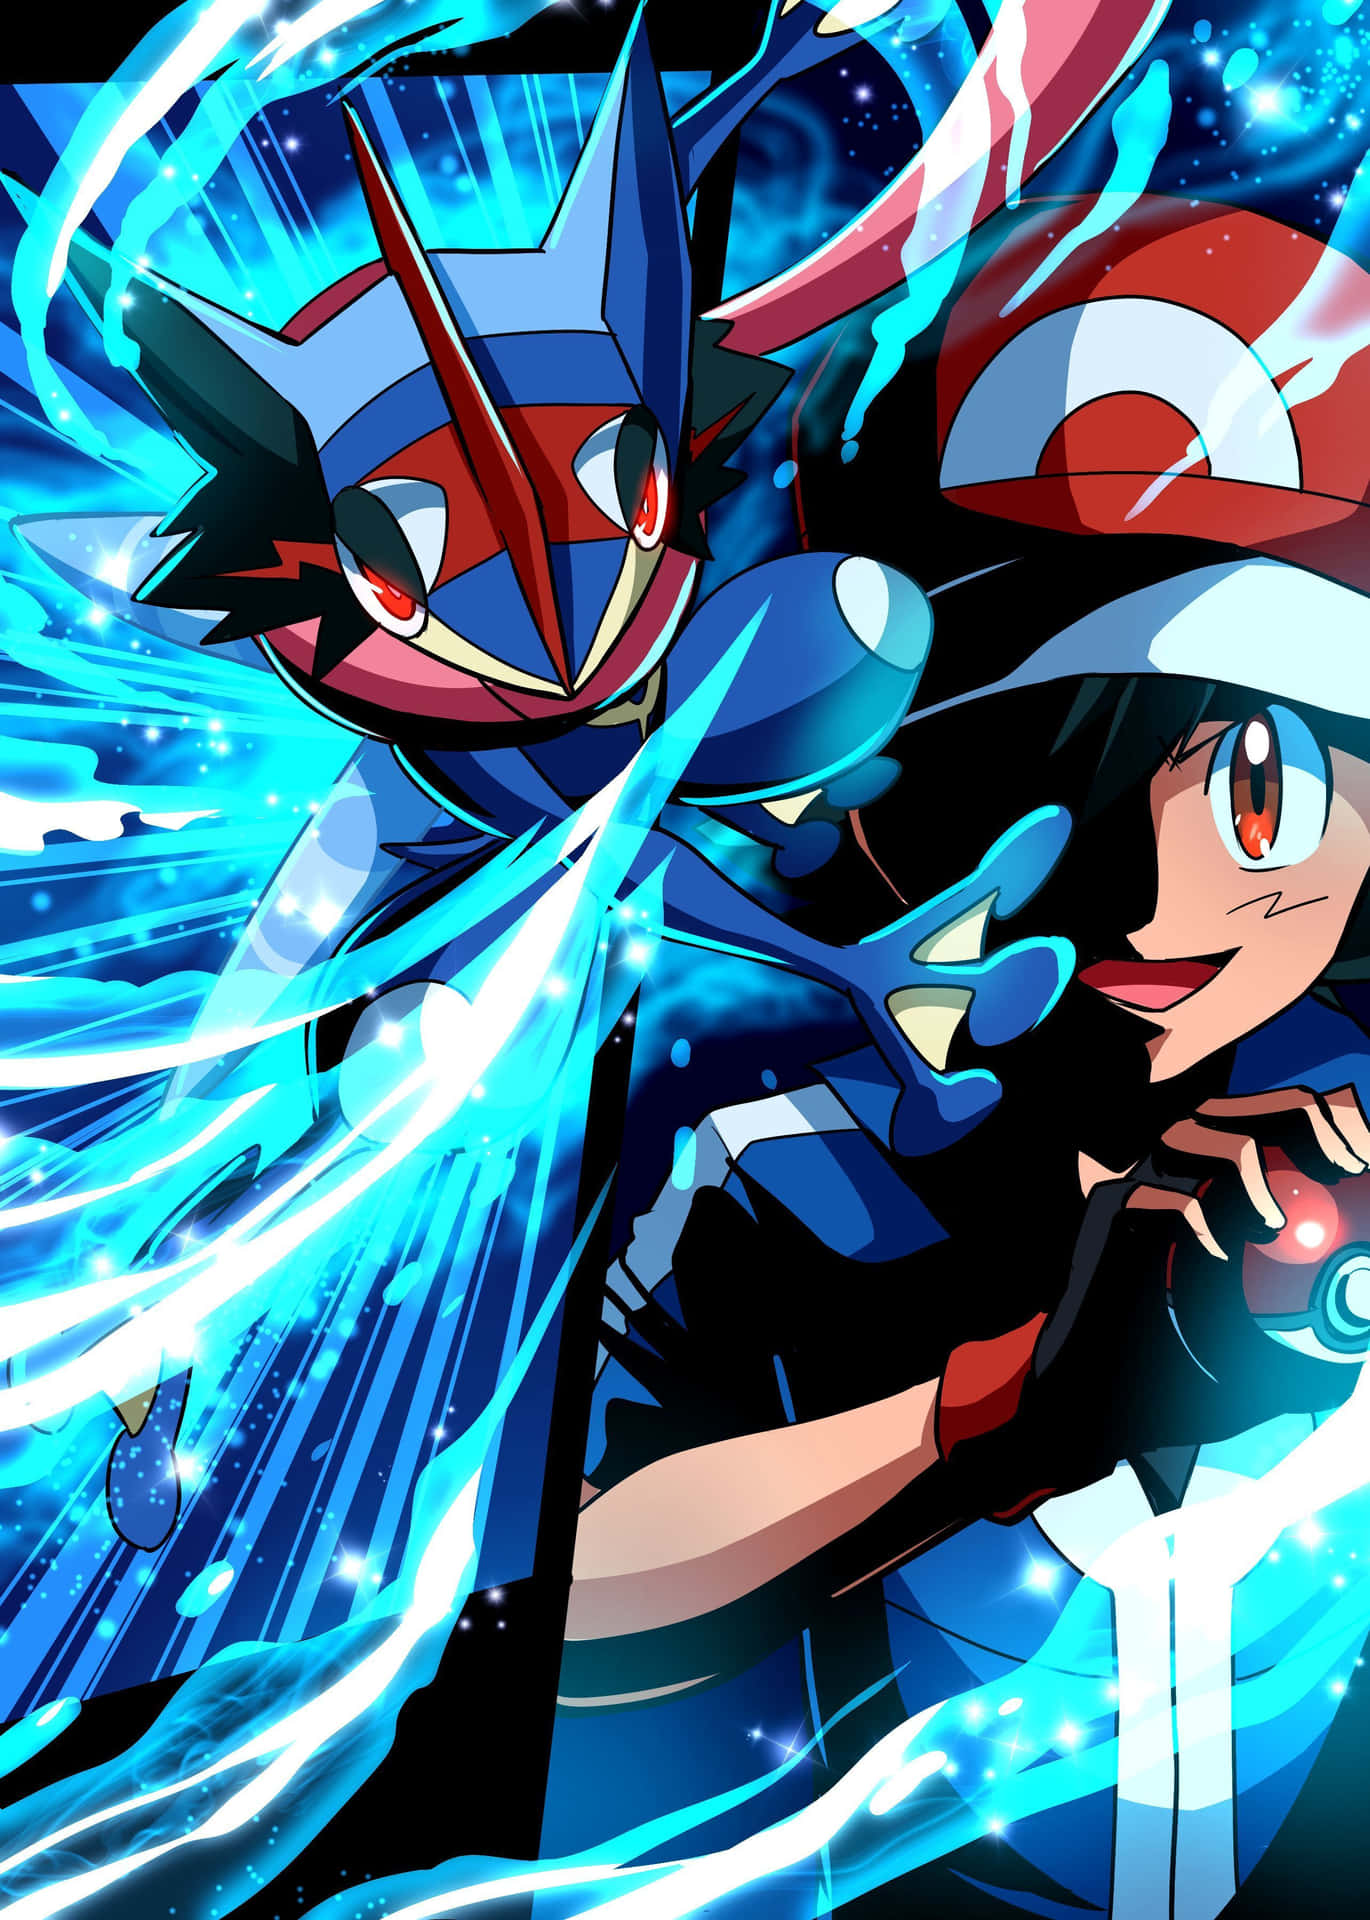 Pokemon Xy - A Pokemon Character With Blue Lights